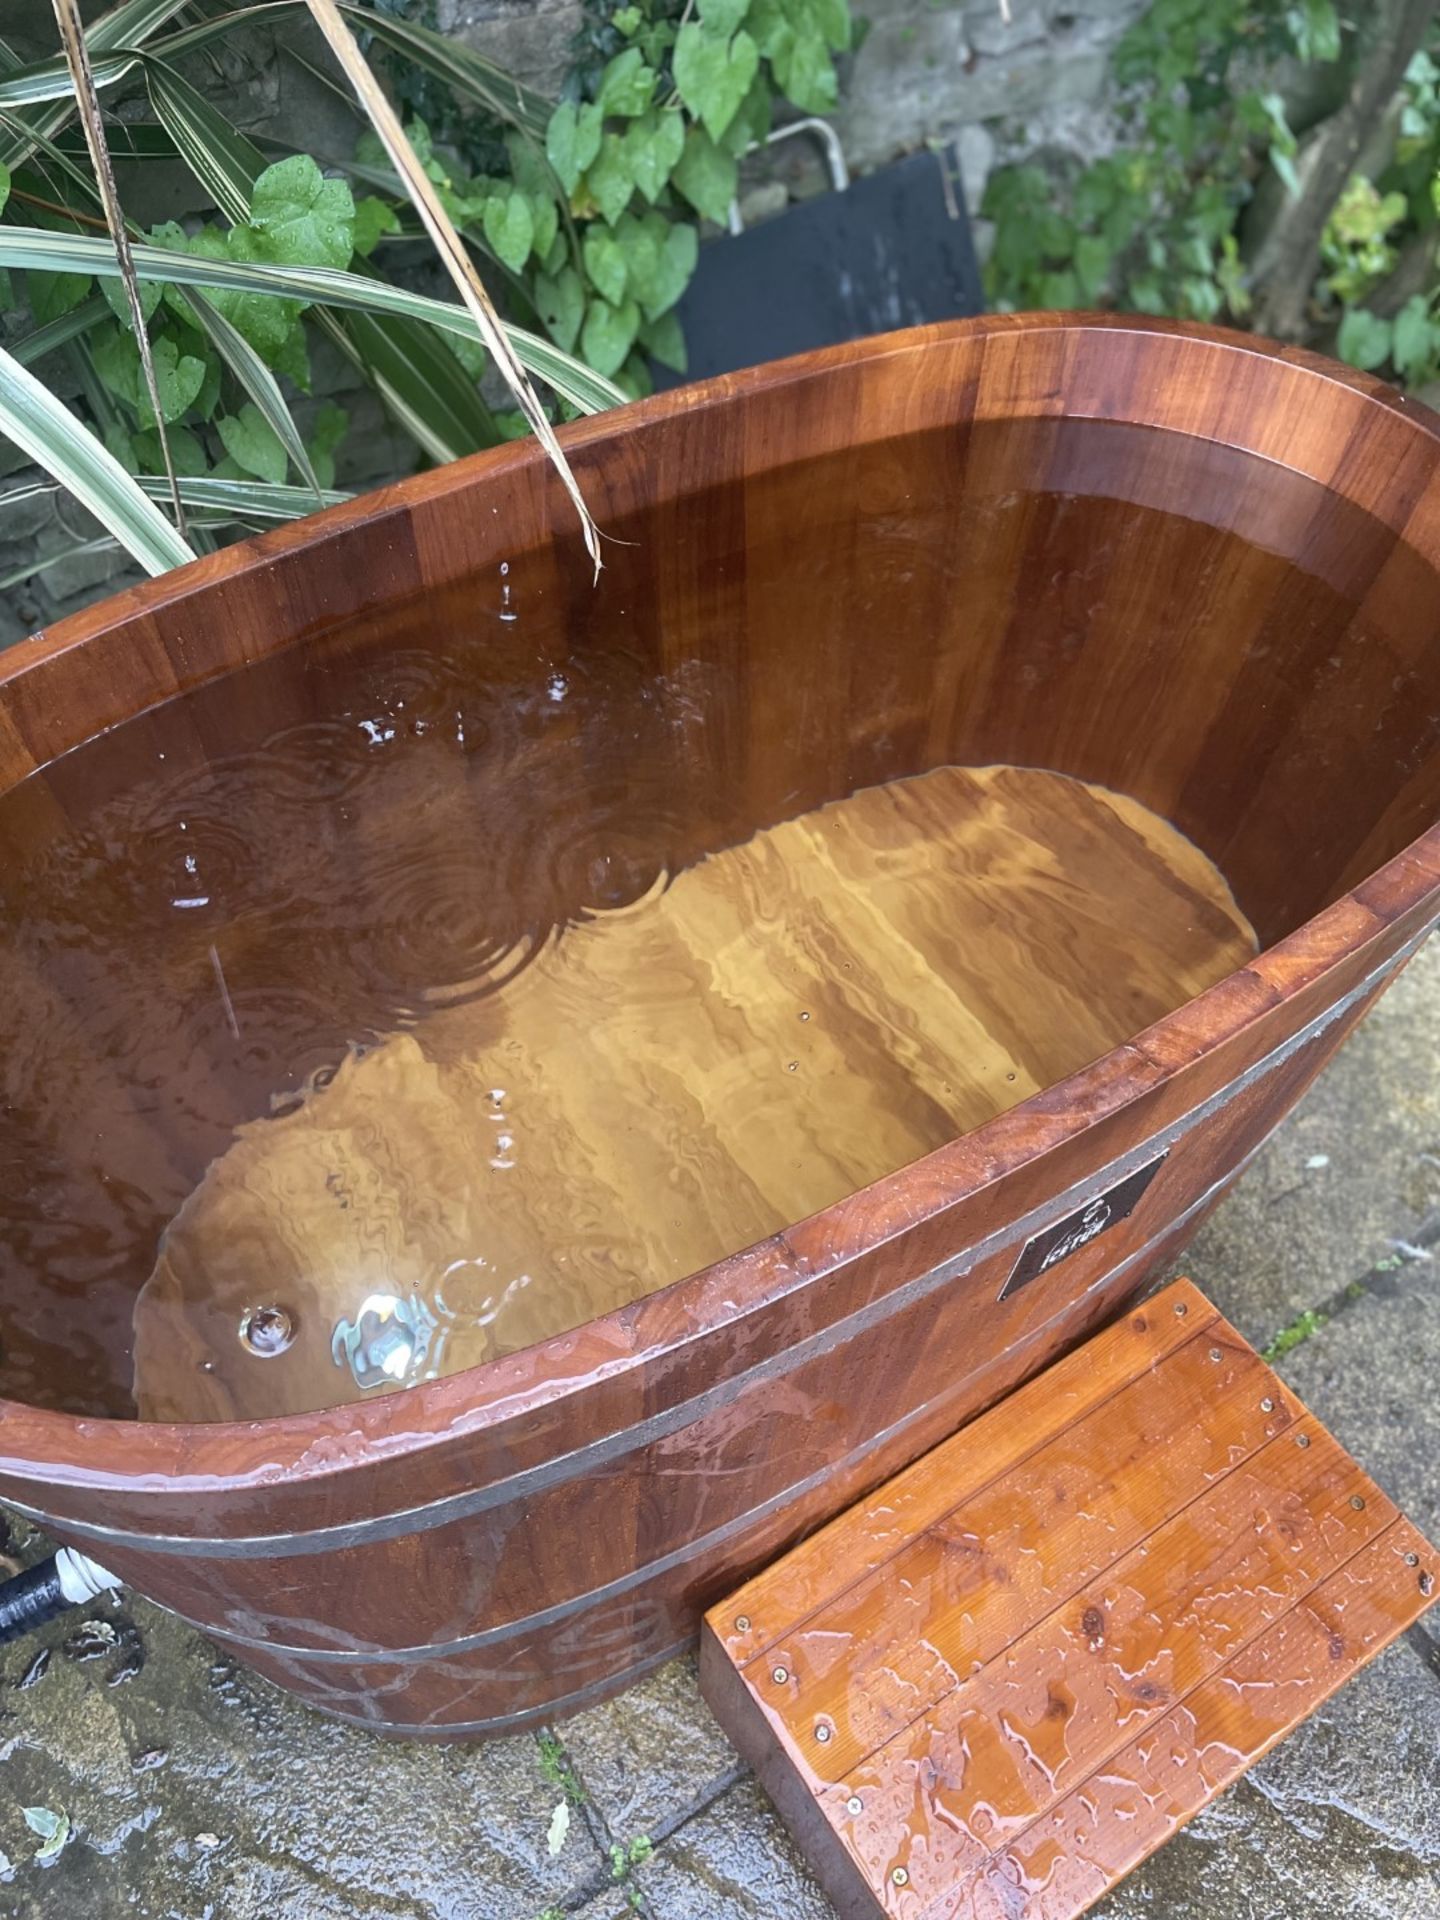 1 x Self-Cleaning Wooden Ice Tub With Ozone Disinfection- Brand New With Warranty - CL774 - - Image 4 of 7